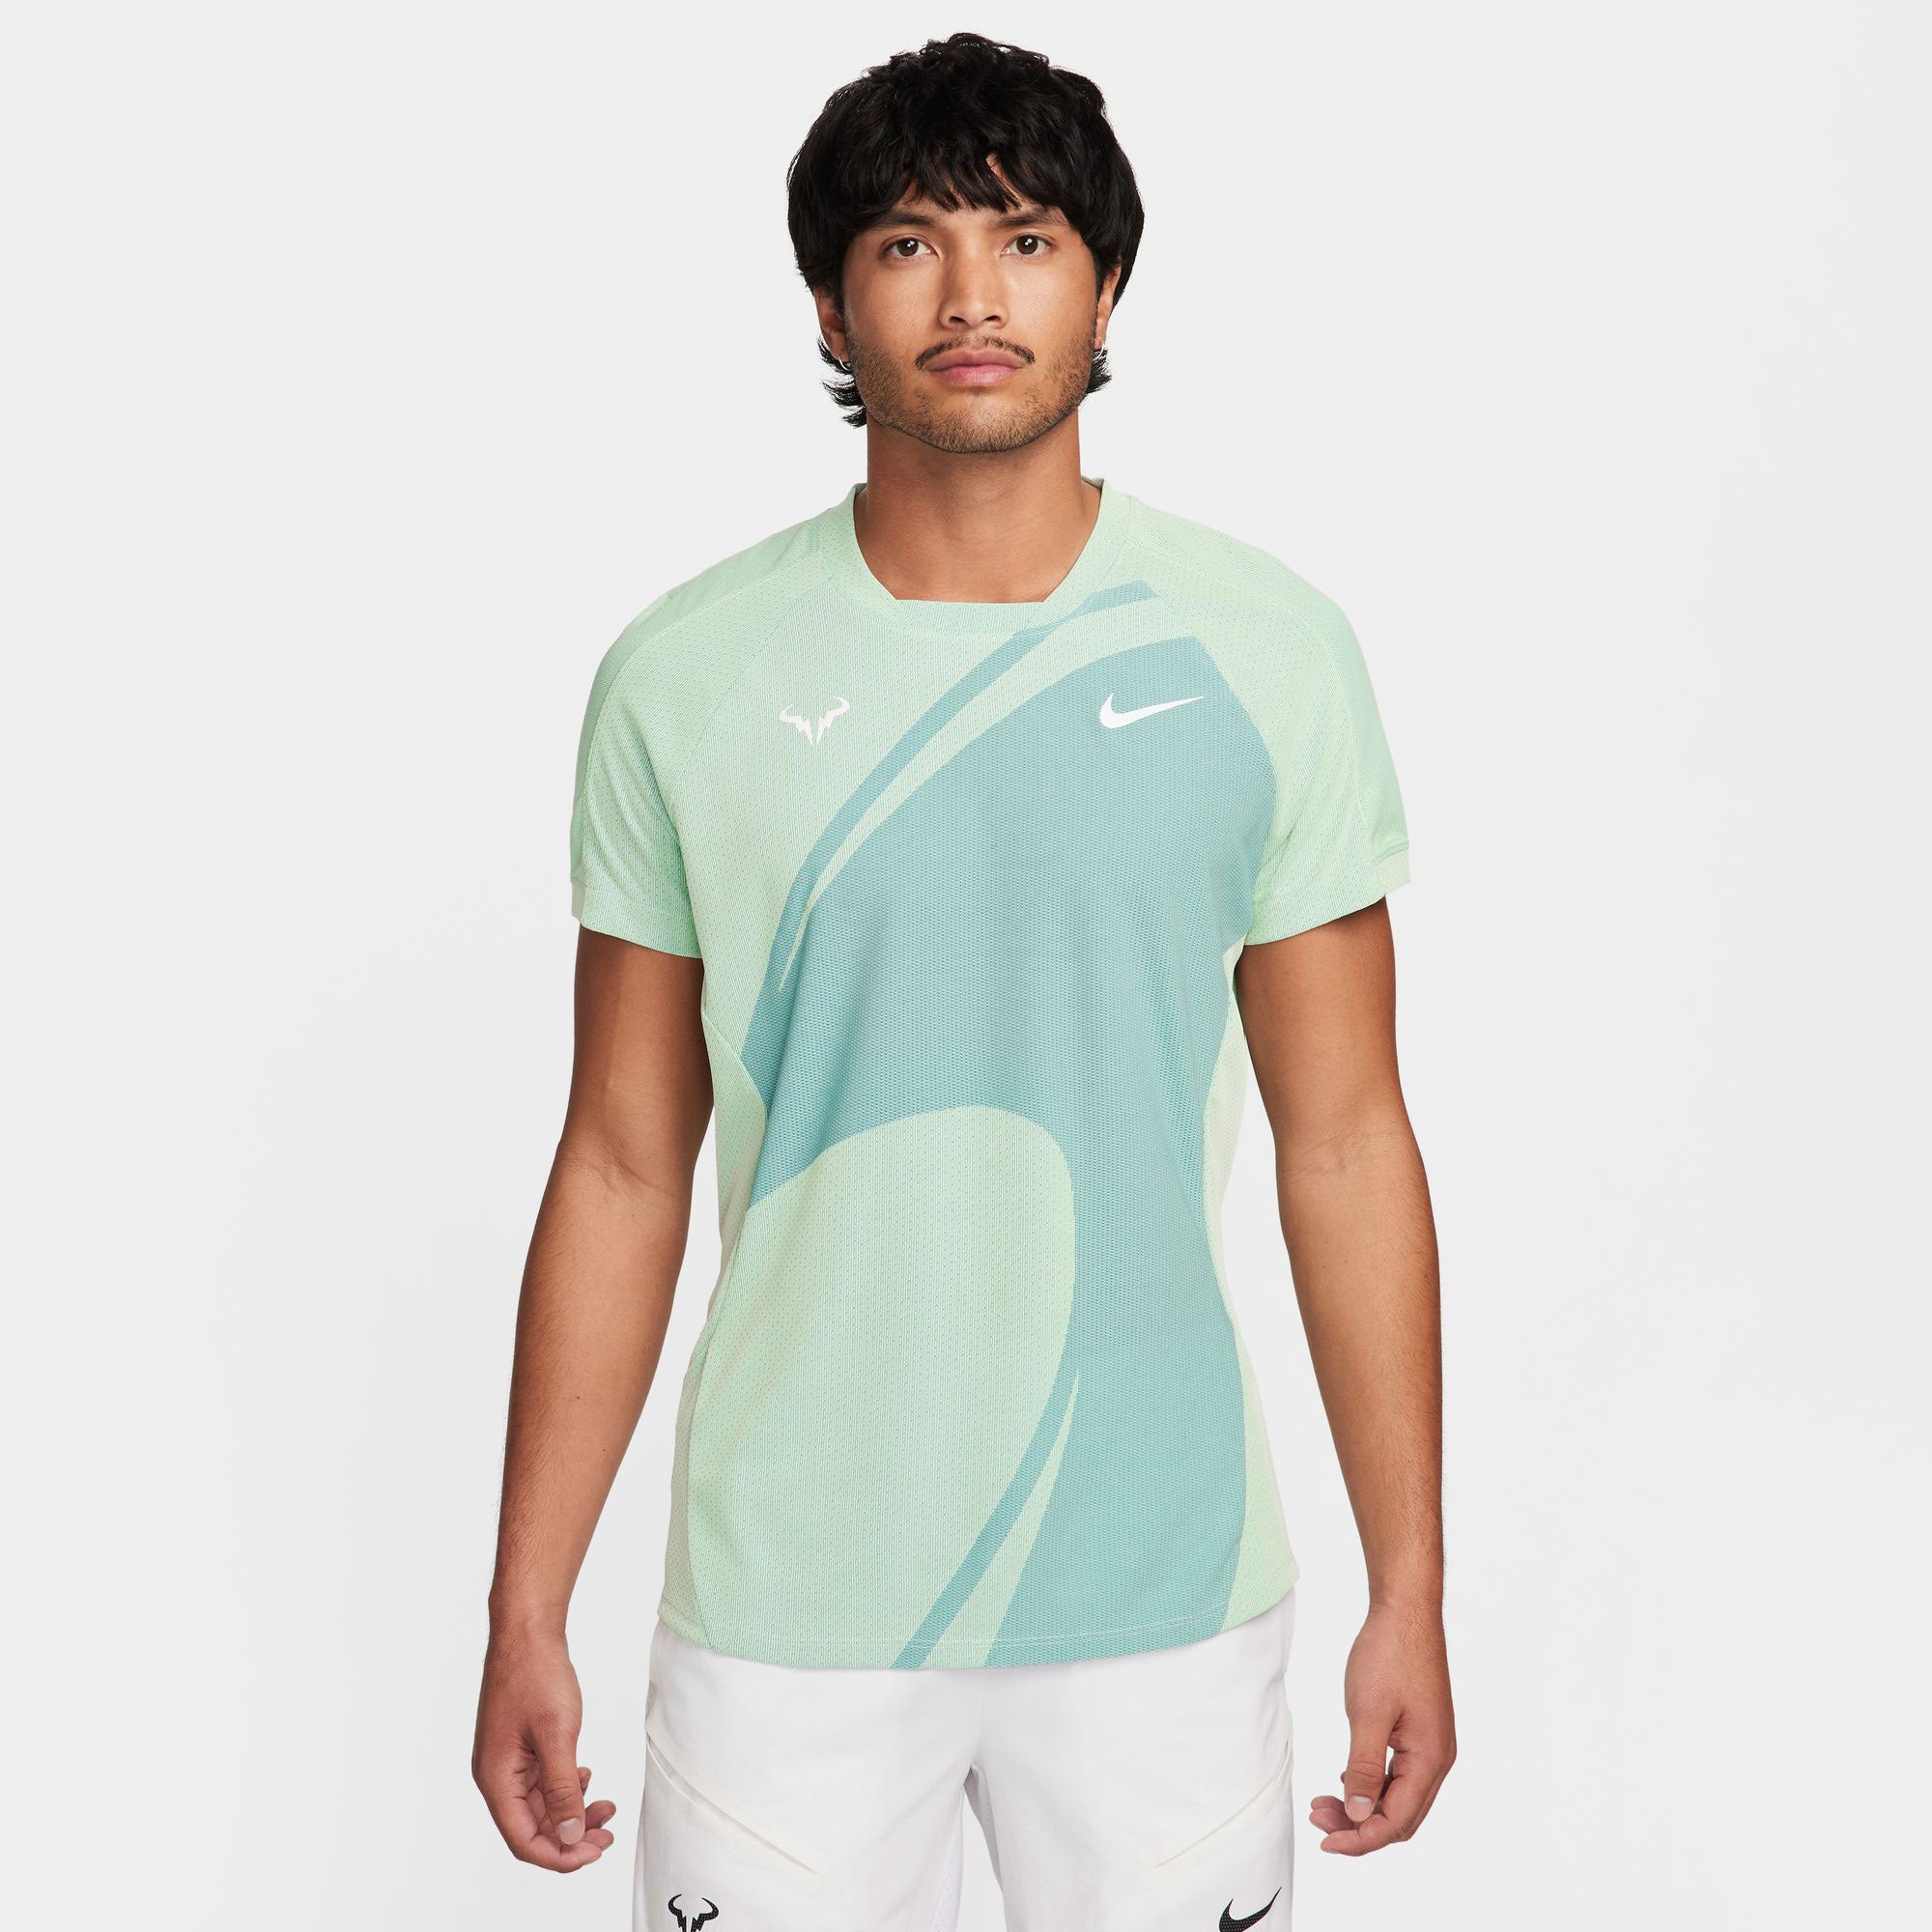 Nike All Men's Tennis - Shoes, Clothing & Accessories